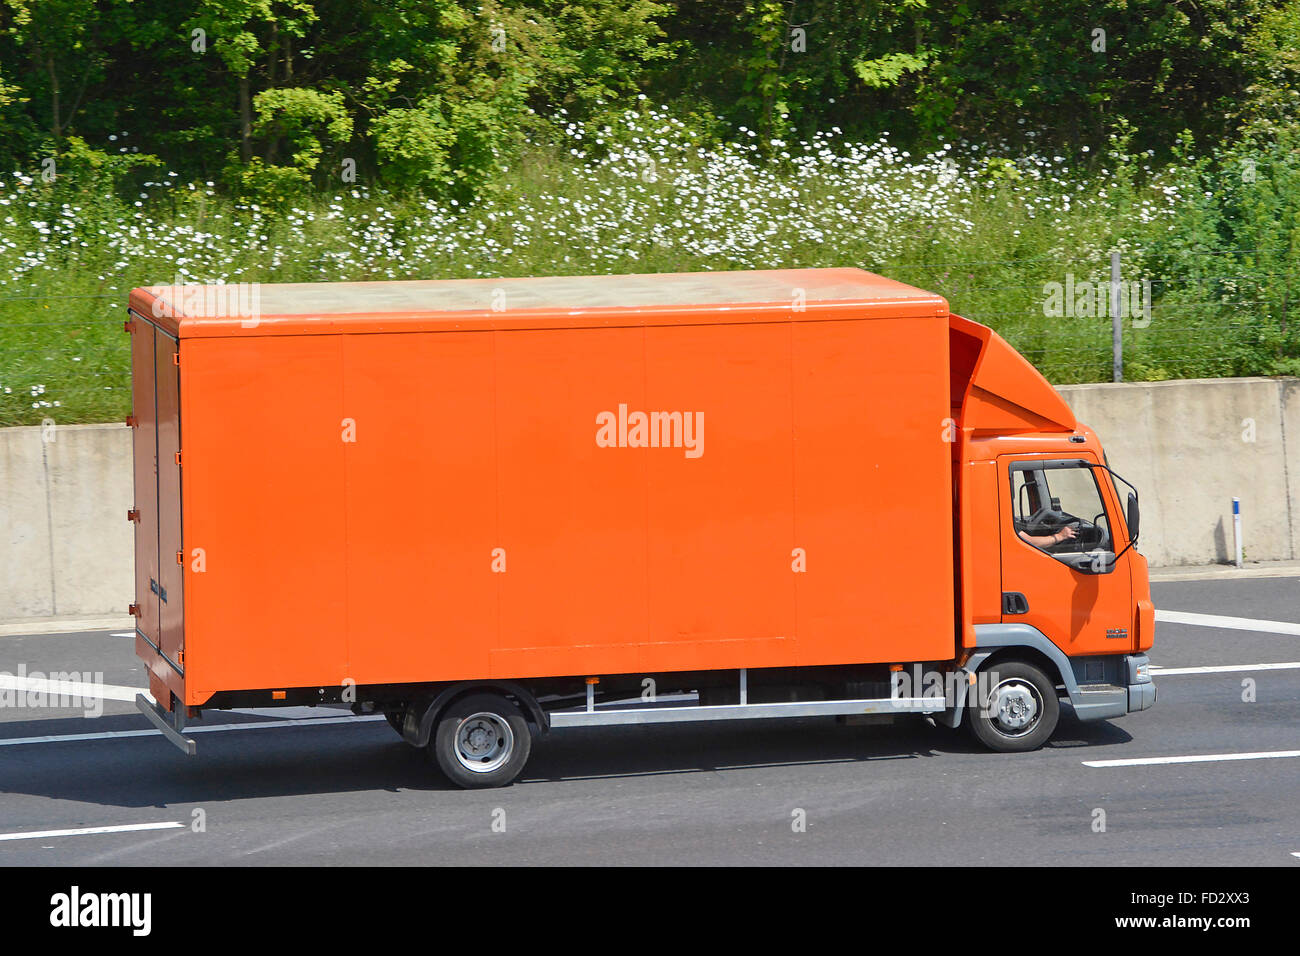 Side view transport via unmarked clean brown colour van lorry truck delivery driver travelling along M25 motorway Essex England UK Stock Photo